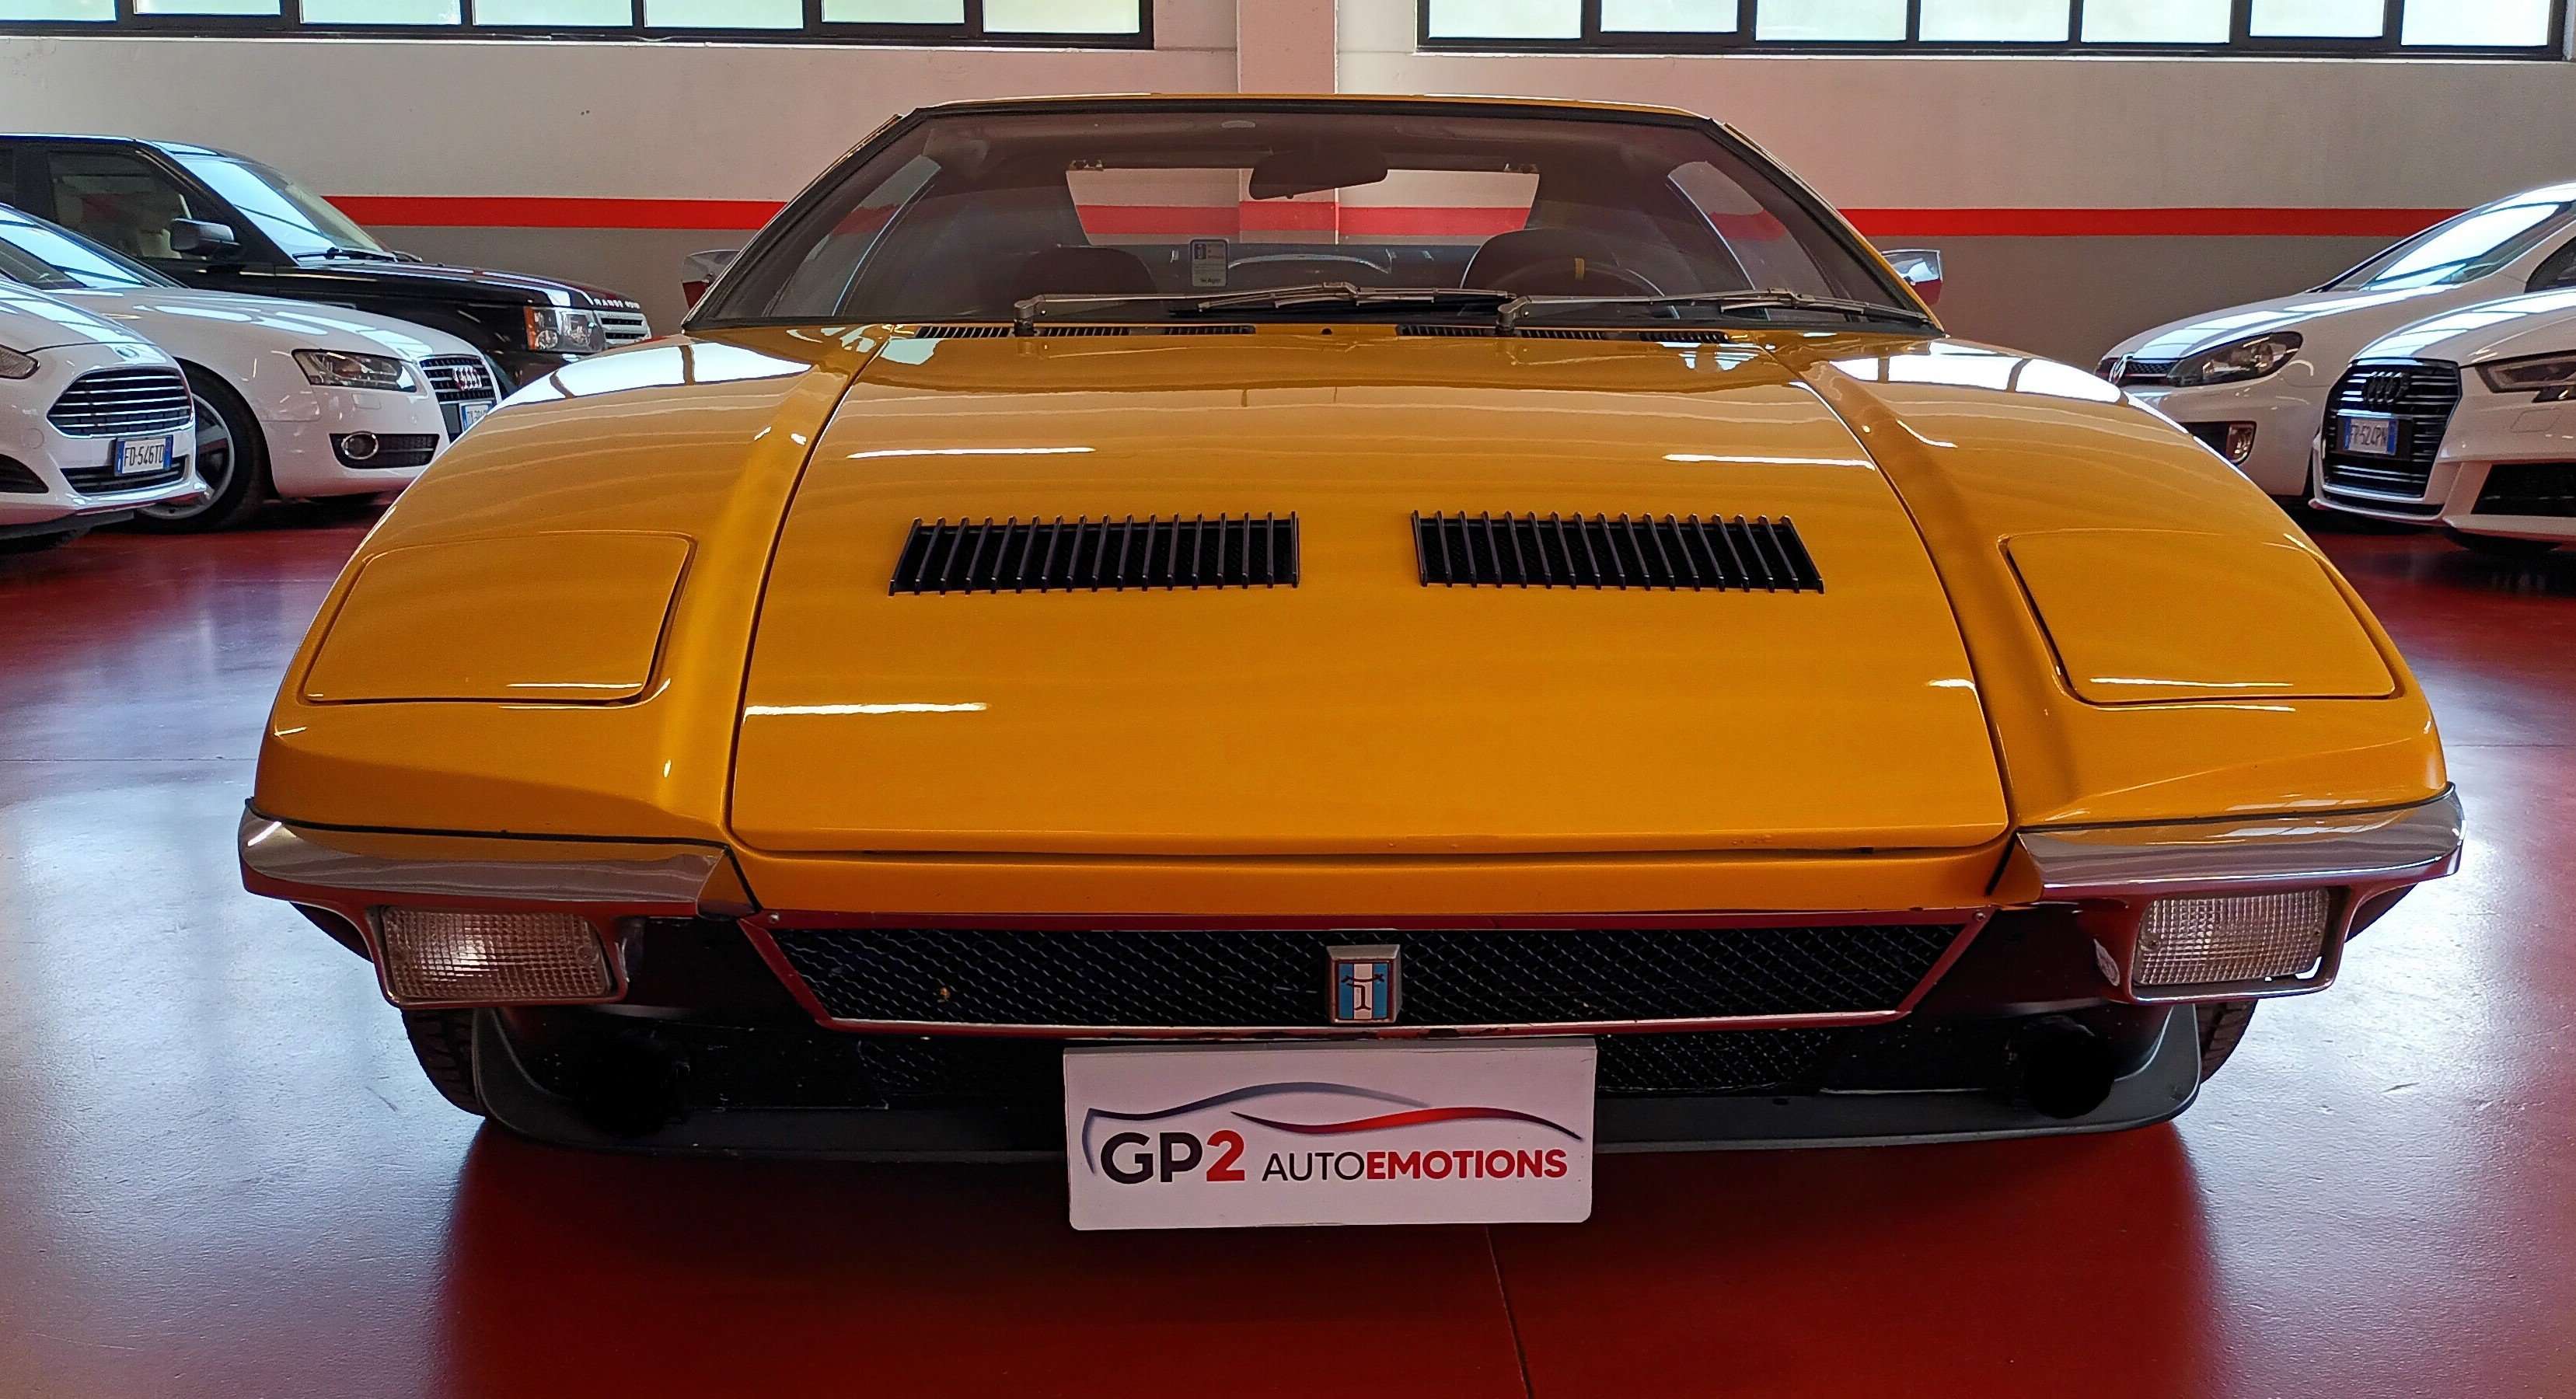 De Tomaso Pantera Coupe in Yellow used in Castenedolo - Bs for € 987,654.-